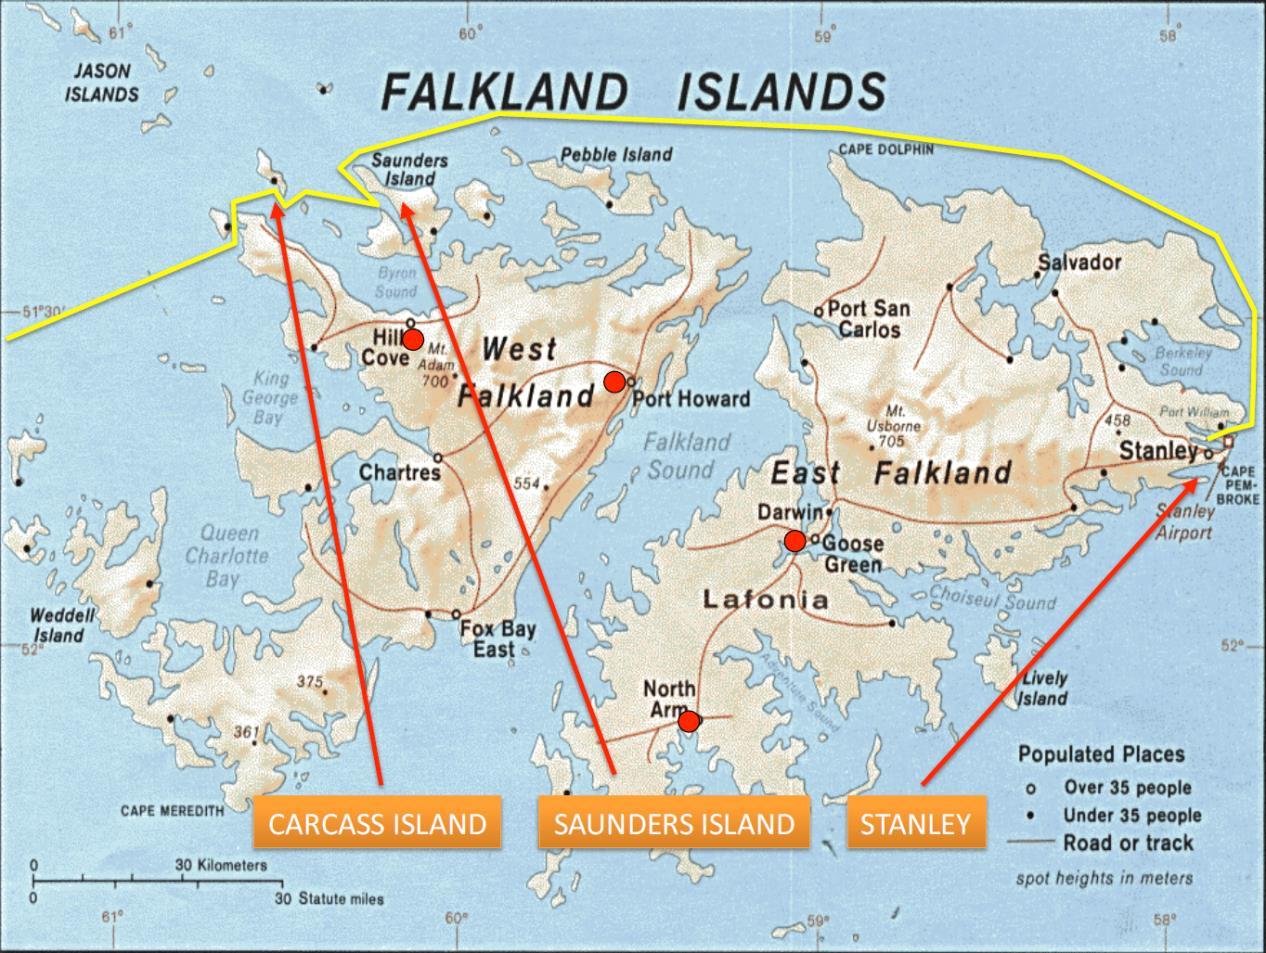 Our stops on Falkland Islands.jpg